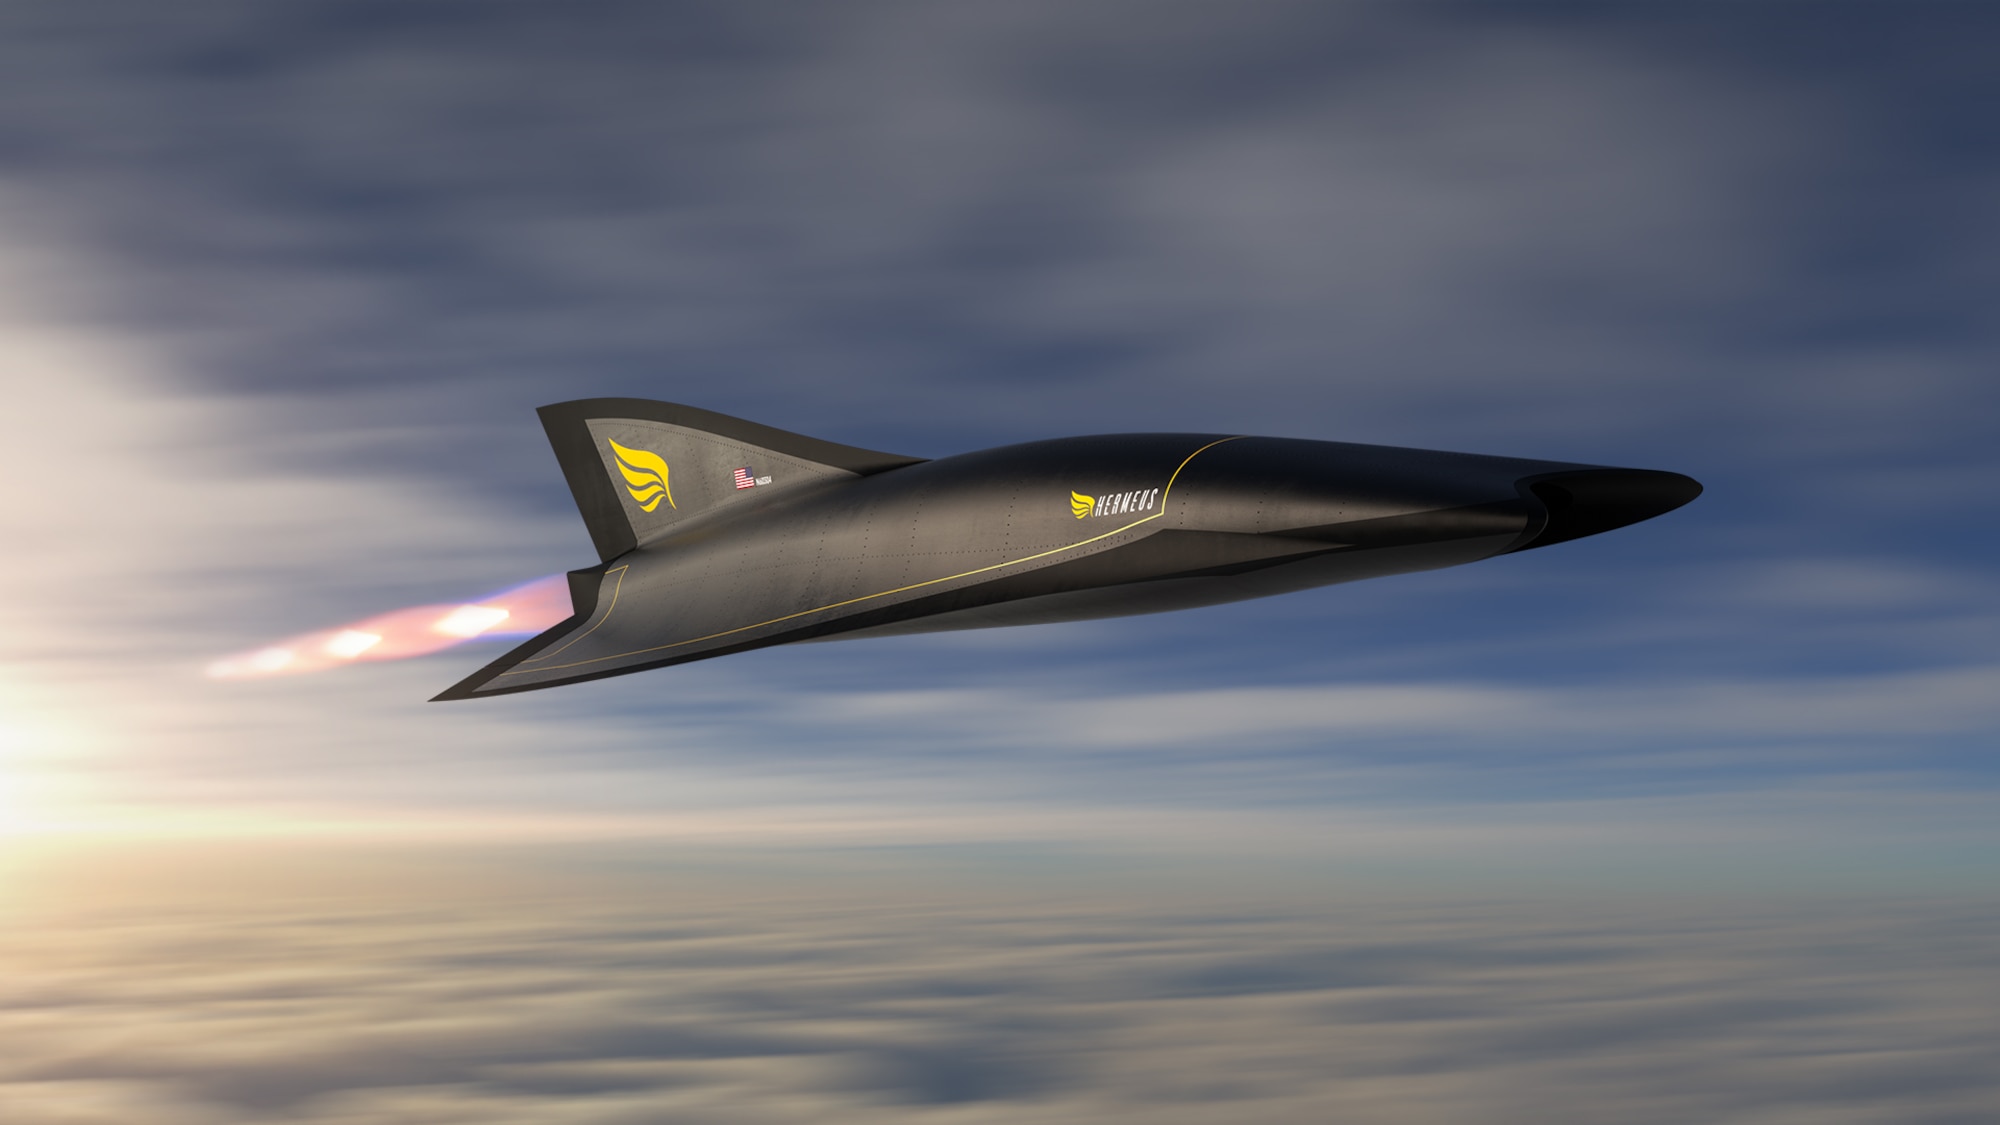 The U.S. Air Force is investing in the Hermeus Corporation – a U.S. based aerospace company – via a $60 million jointly funded contract that was awarded July 30, 2021.